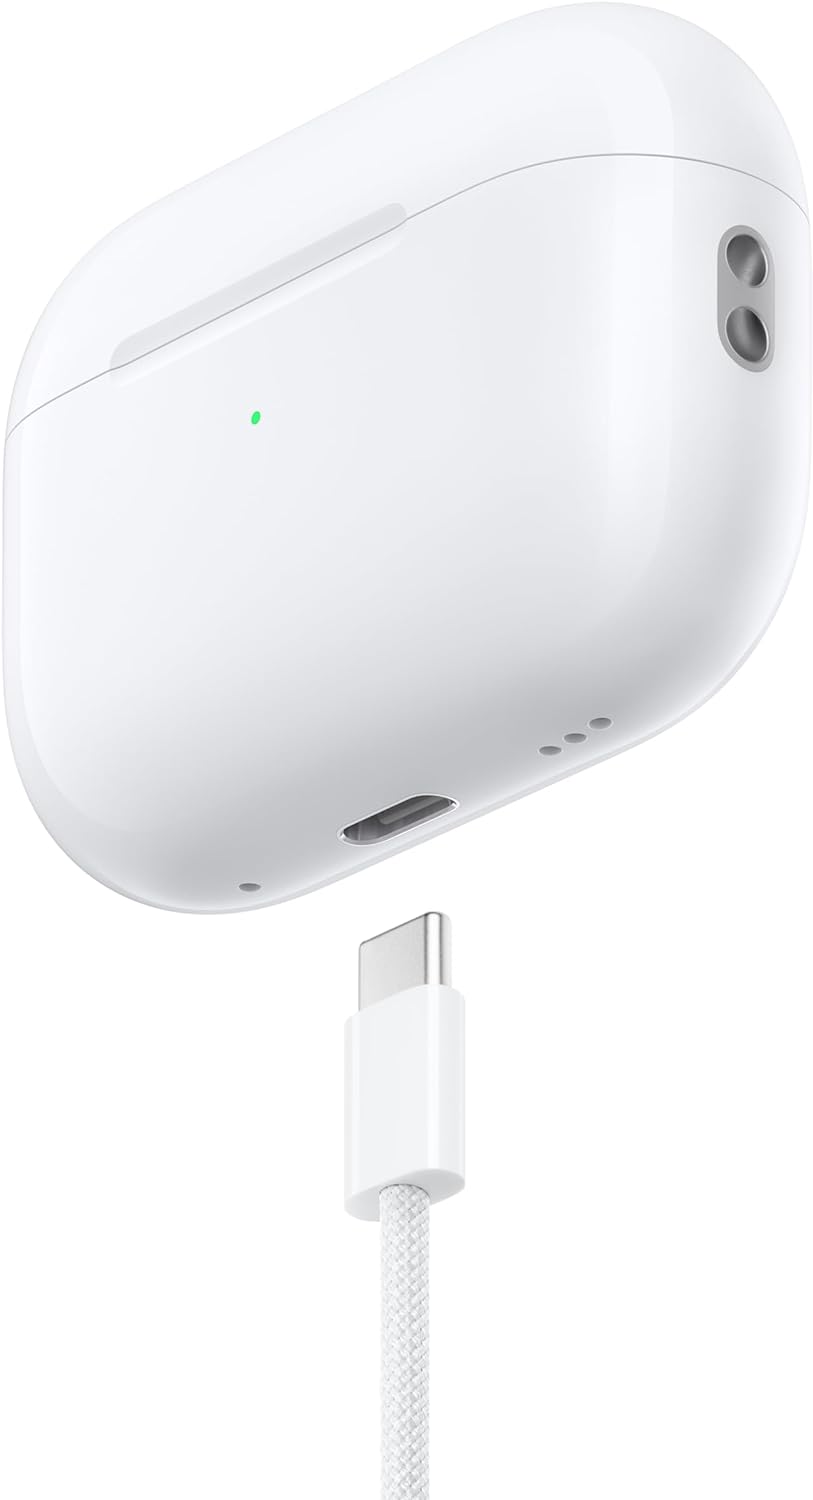 Apple AirPods Pro (2nd Gen) with MagSafe Case (USB-C)